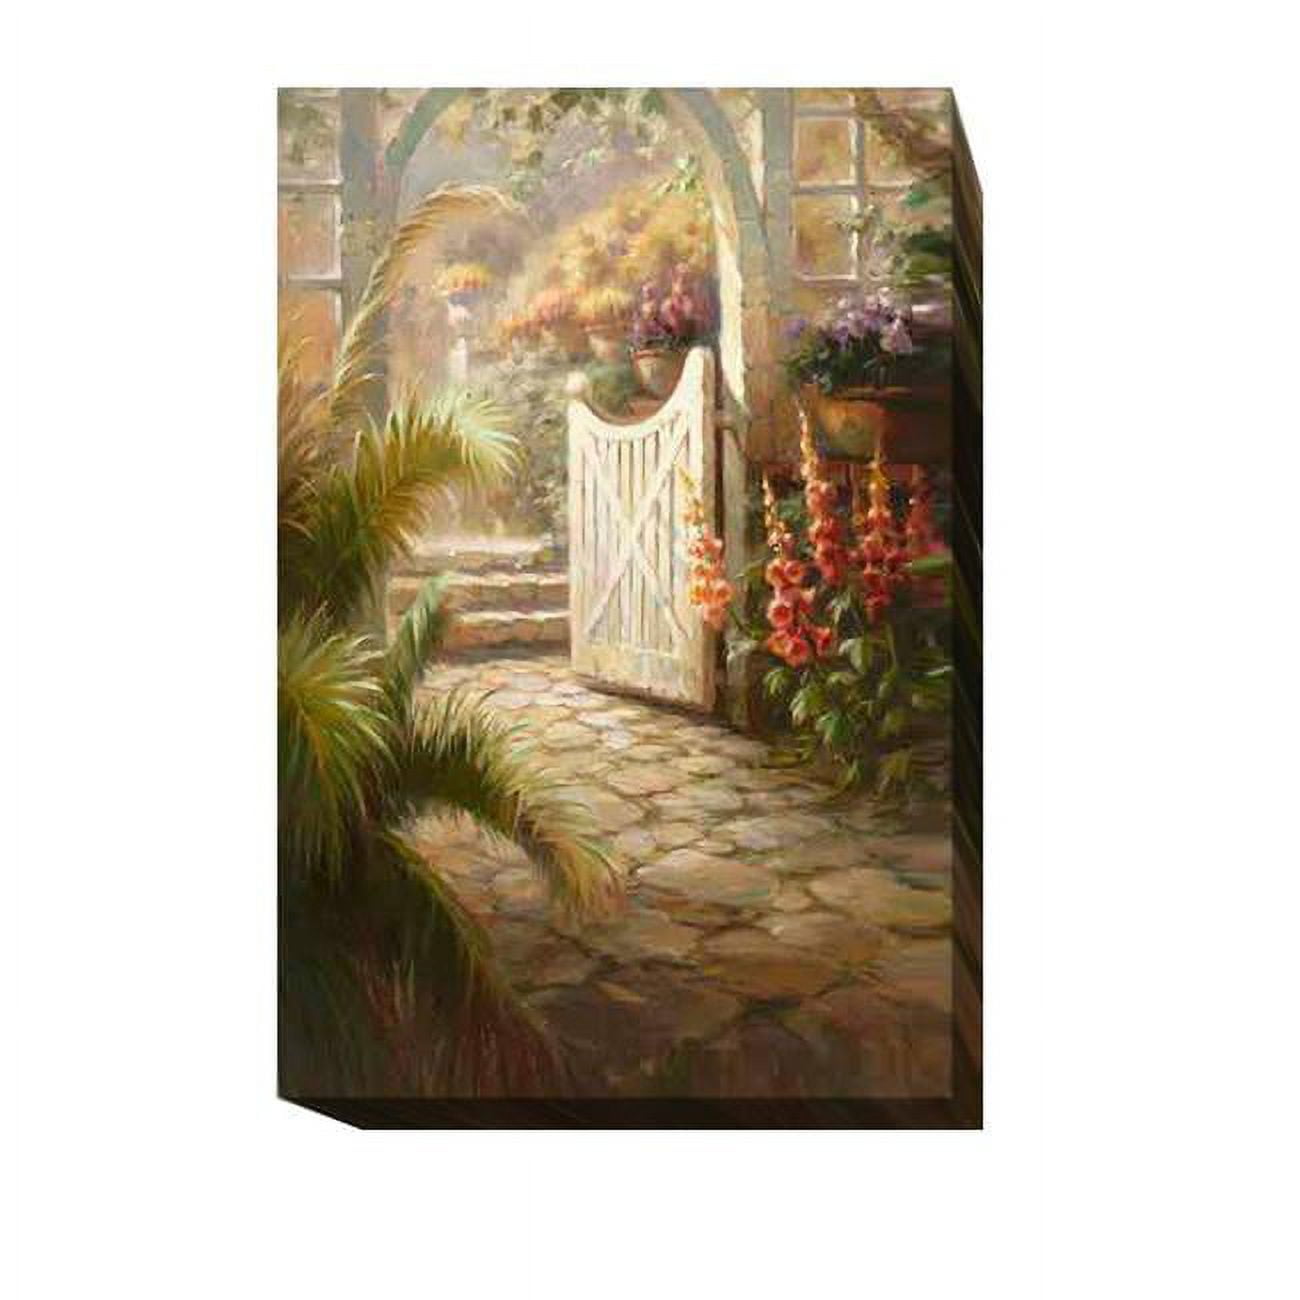 3045g533eg Morning In The Garden By Roberto Lombardi Premium Oversize Gallery-wrapped Canvas Giclee Art - 45 X 30 X 1.5 In.